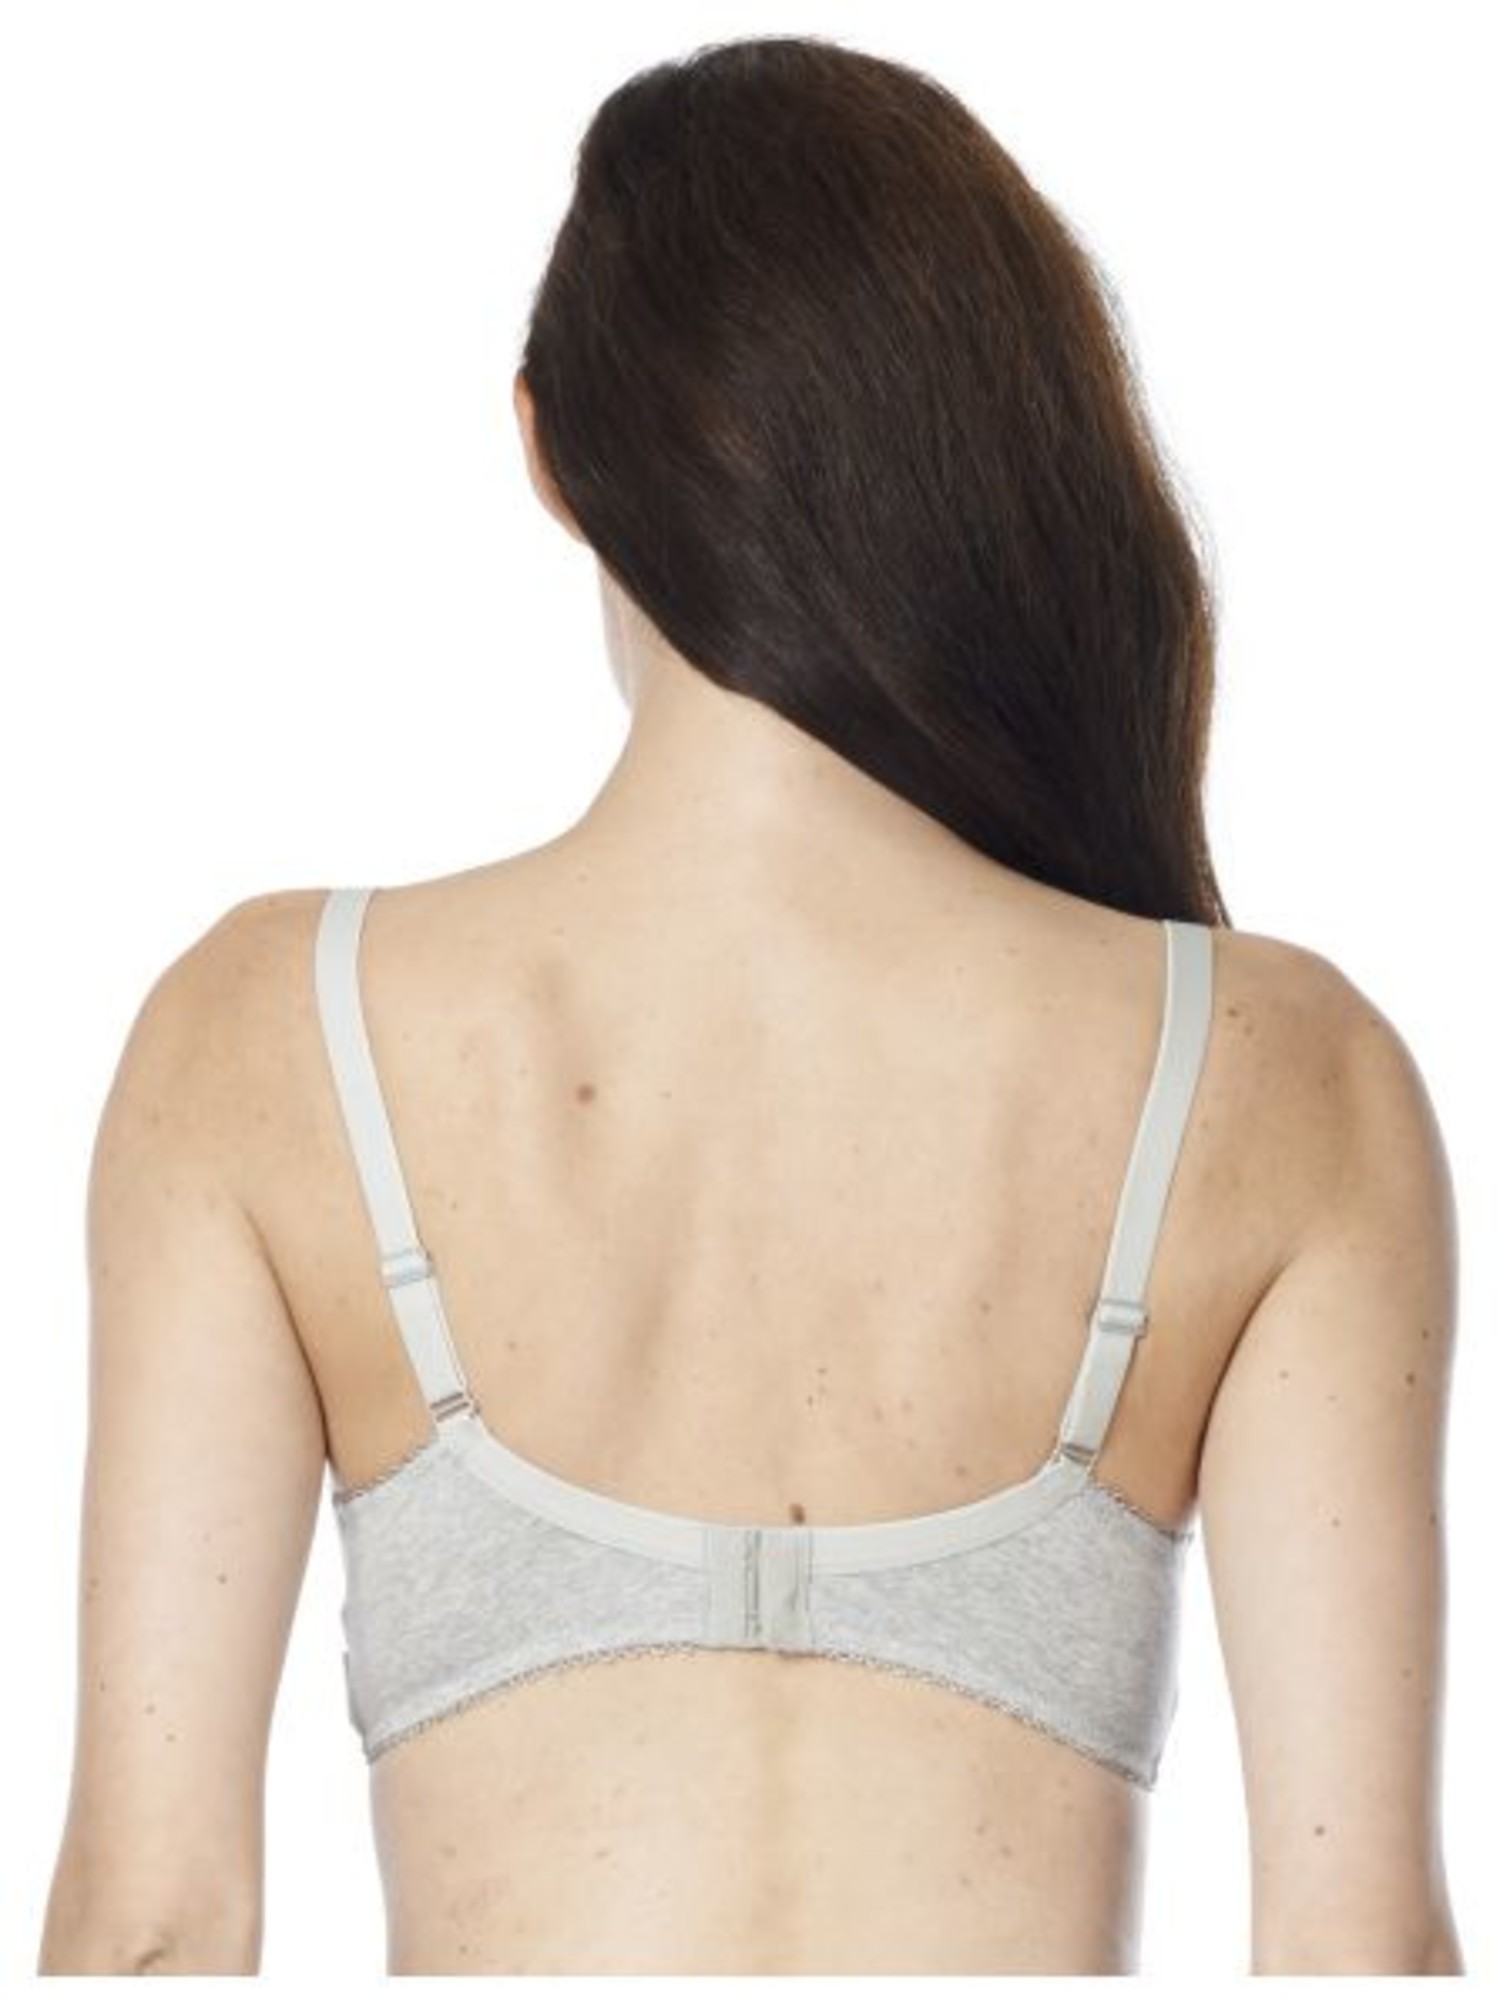 Maternity bras at Noppies online